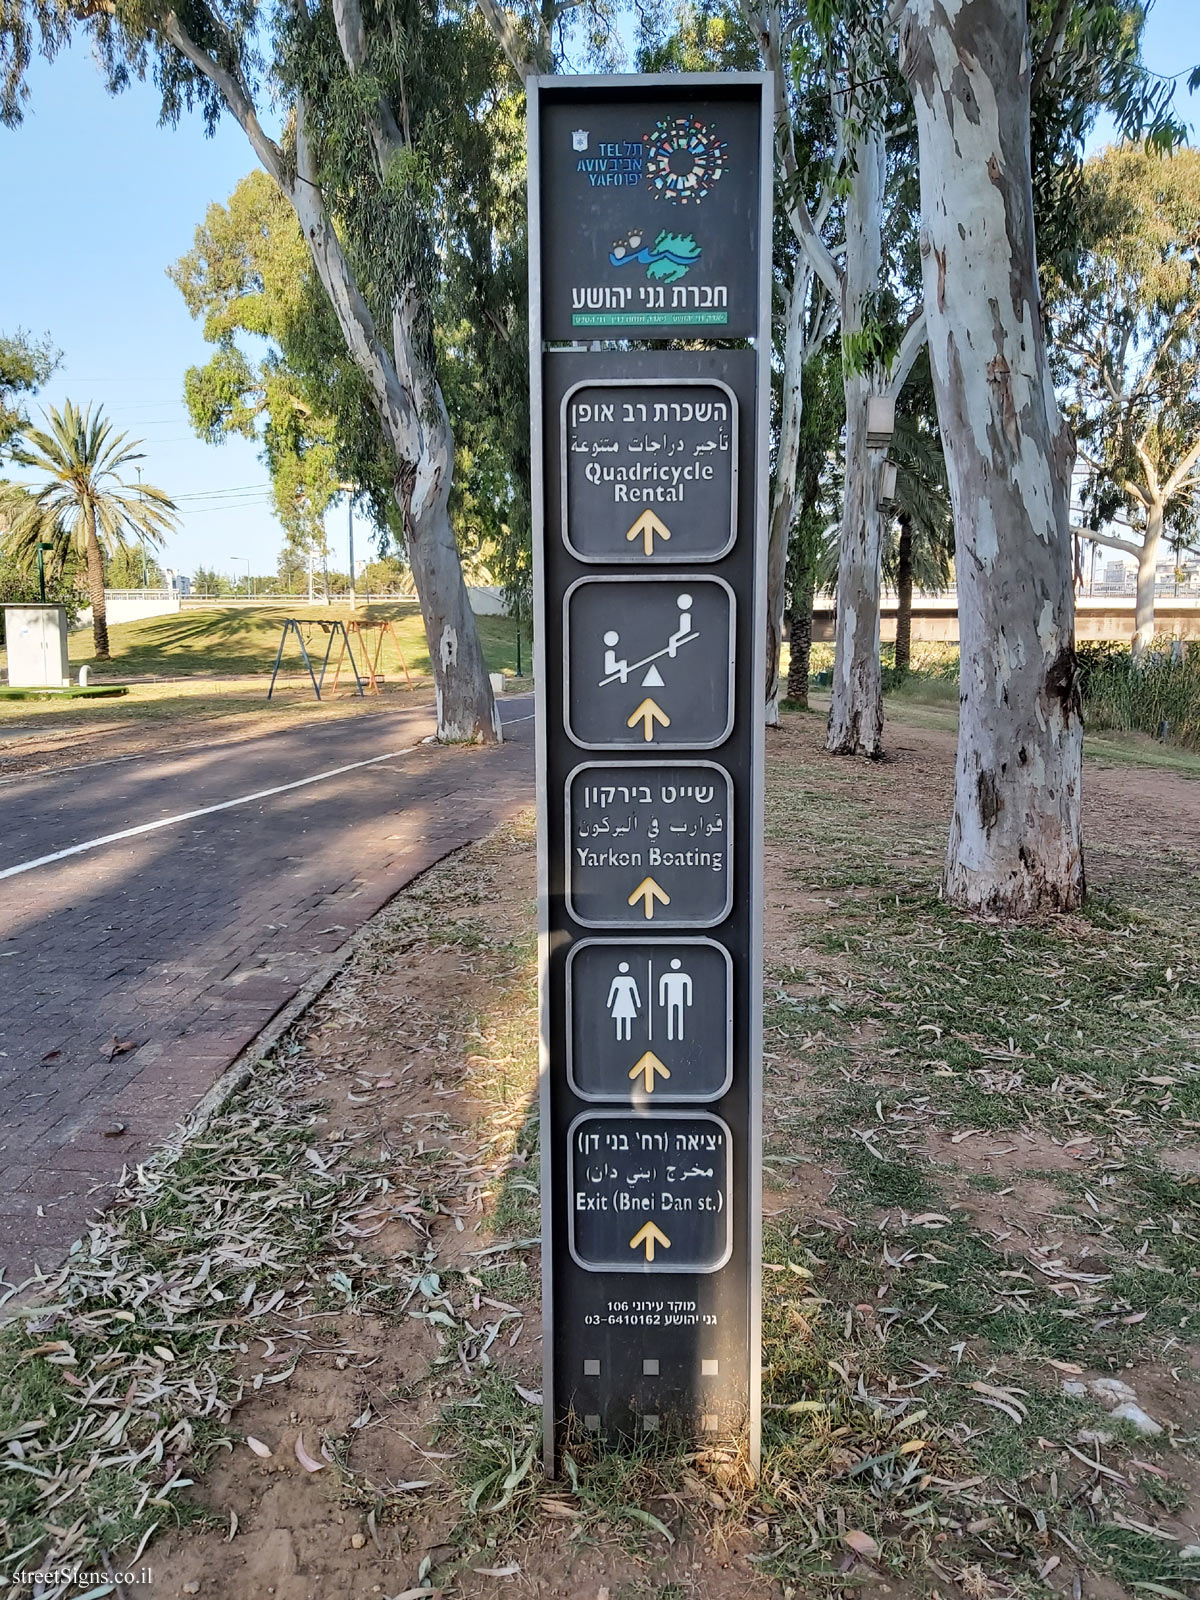 Tel Aviv - Hayarkon Park - A direction sign for activities and sites in the park